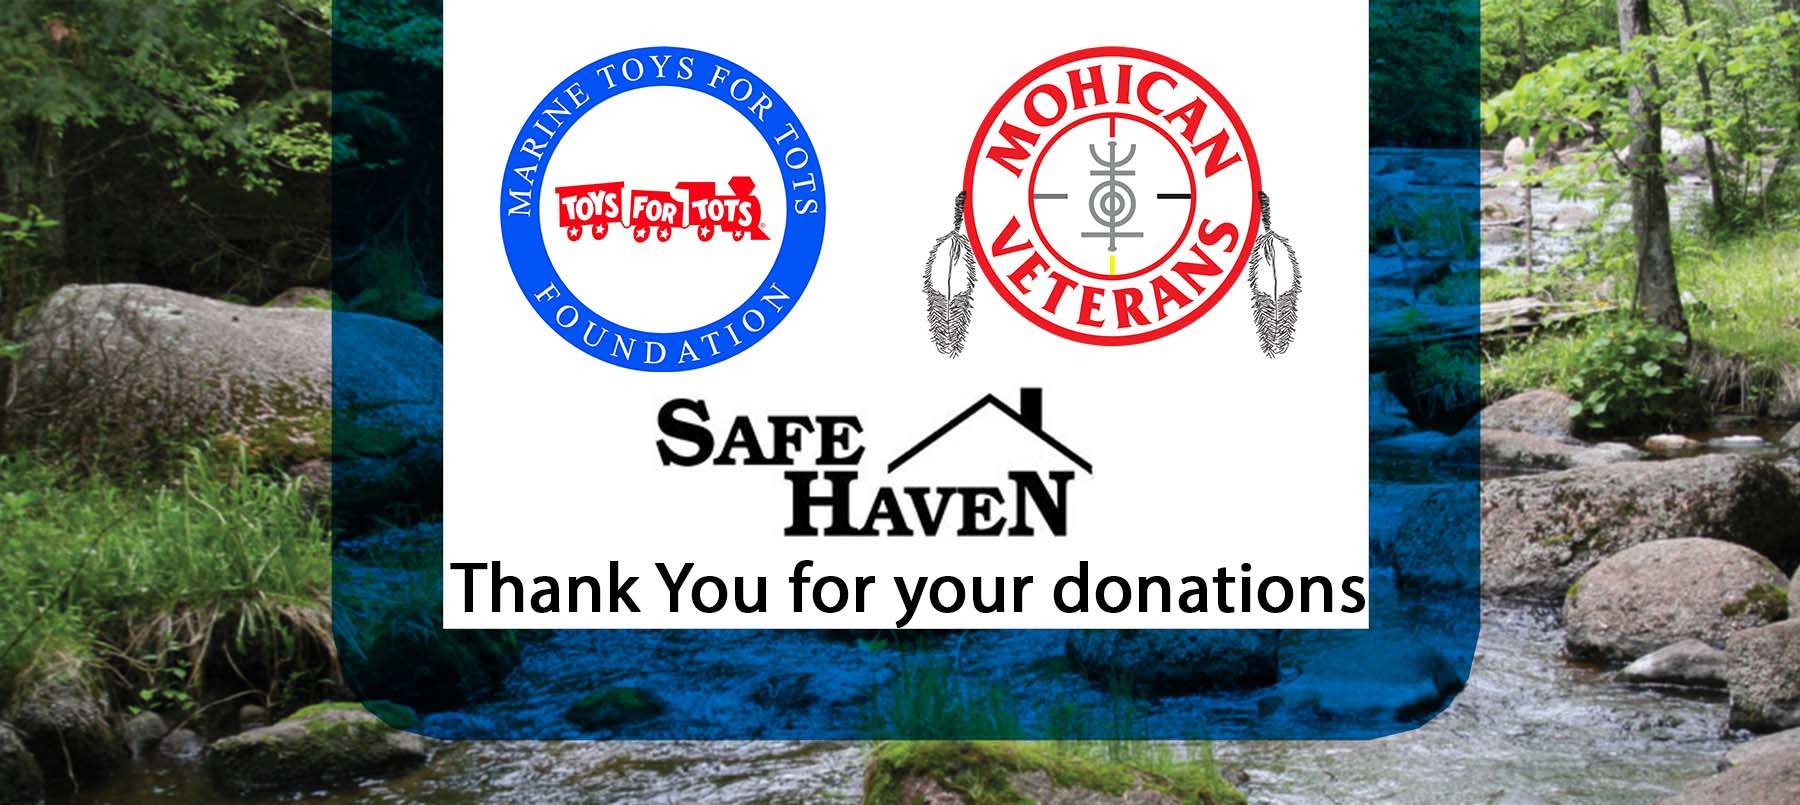 Logos for local charities, Marine Toys For Tots Foundation, Safe Haven, and Mohican Veterans. Background is of the West Branch of Red River in Many Trails Park located in Bowler, Wisconsin